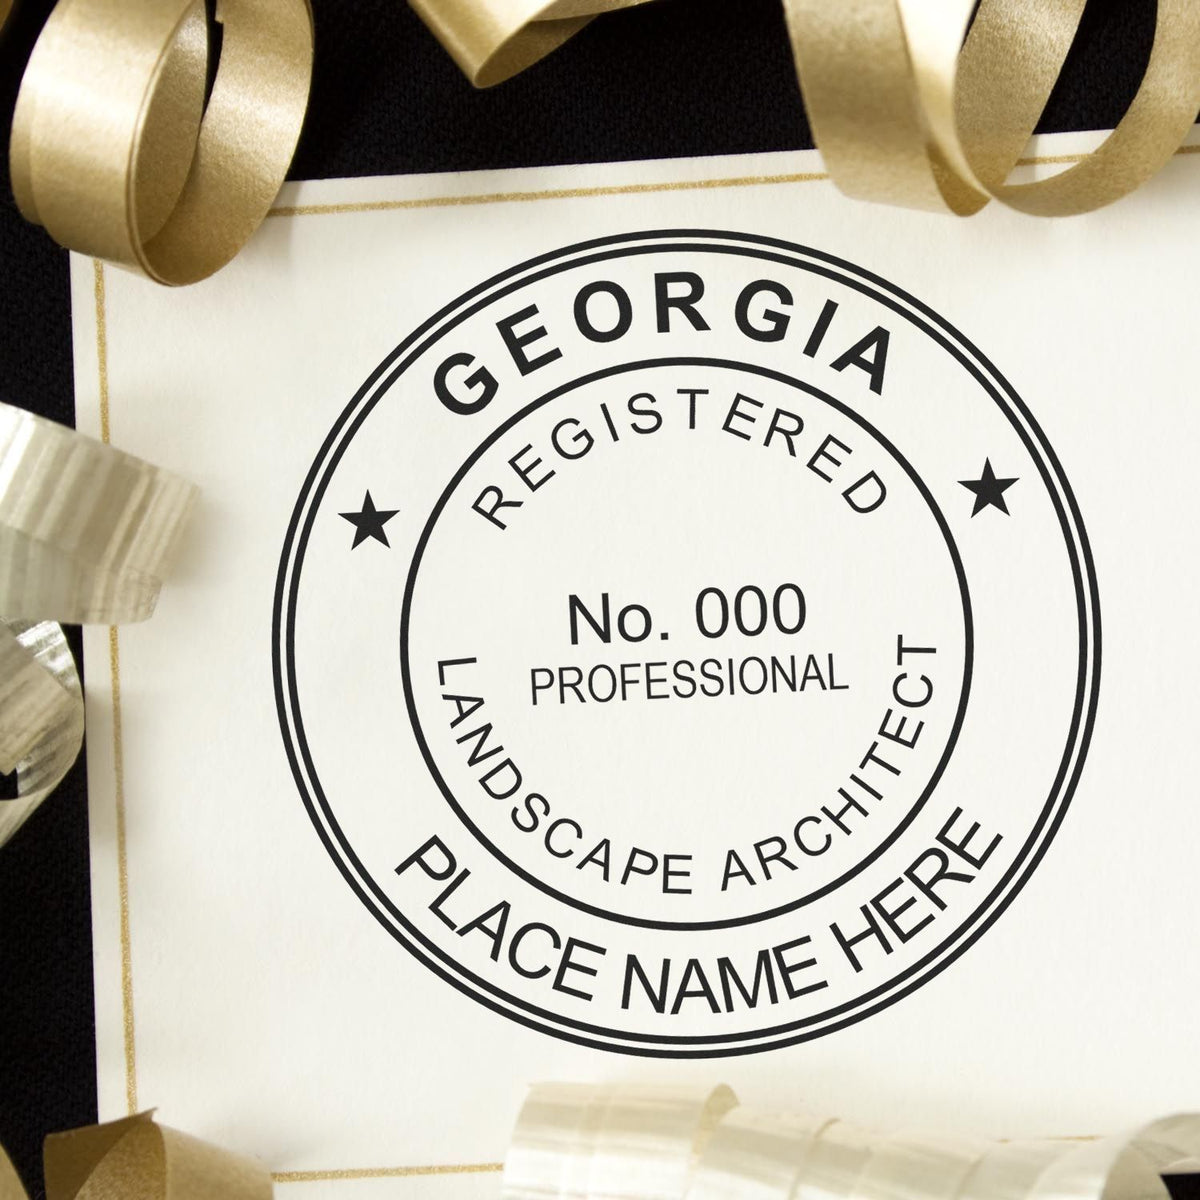 A lifestyle photo showing a stamped image of the Digital Georgia Landscape Architect Stamp on a piece of paper